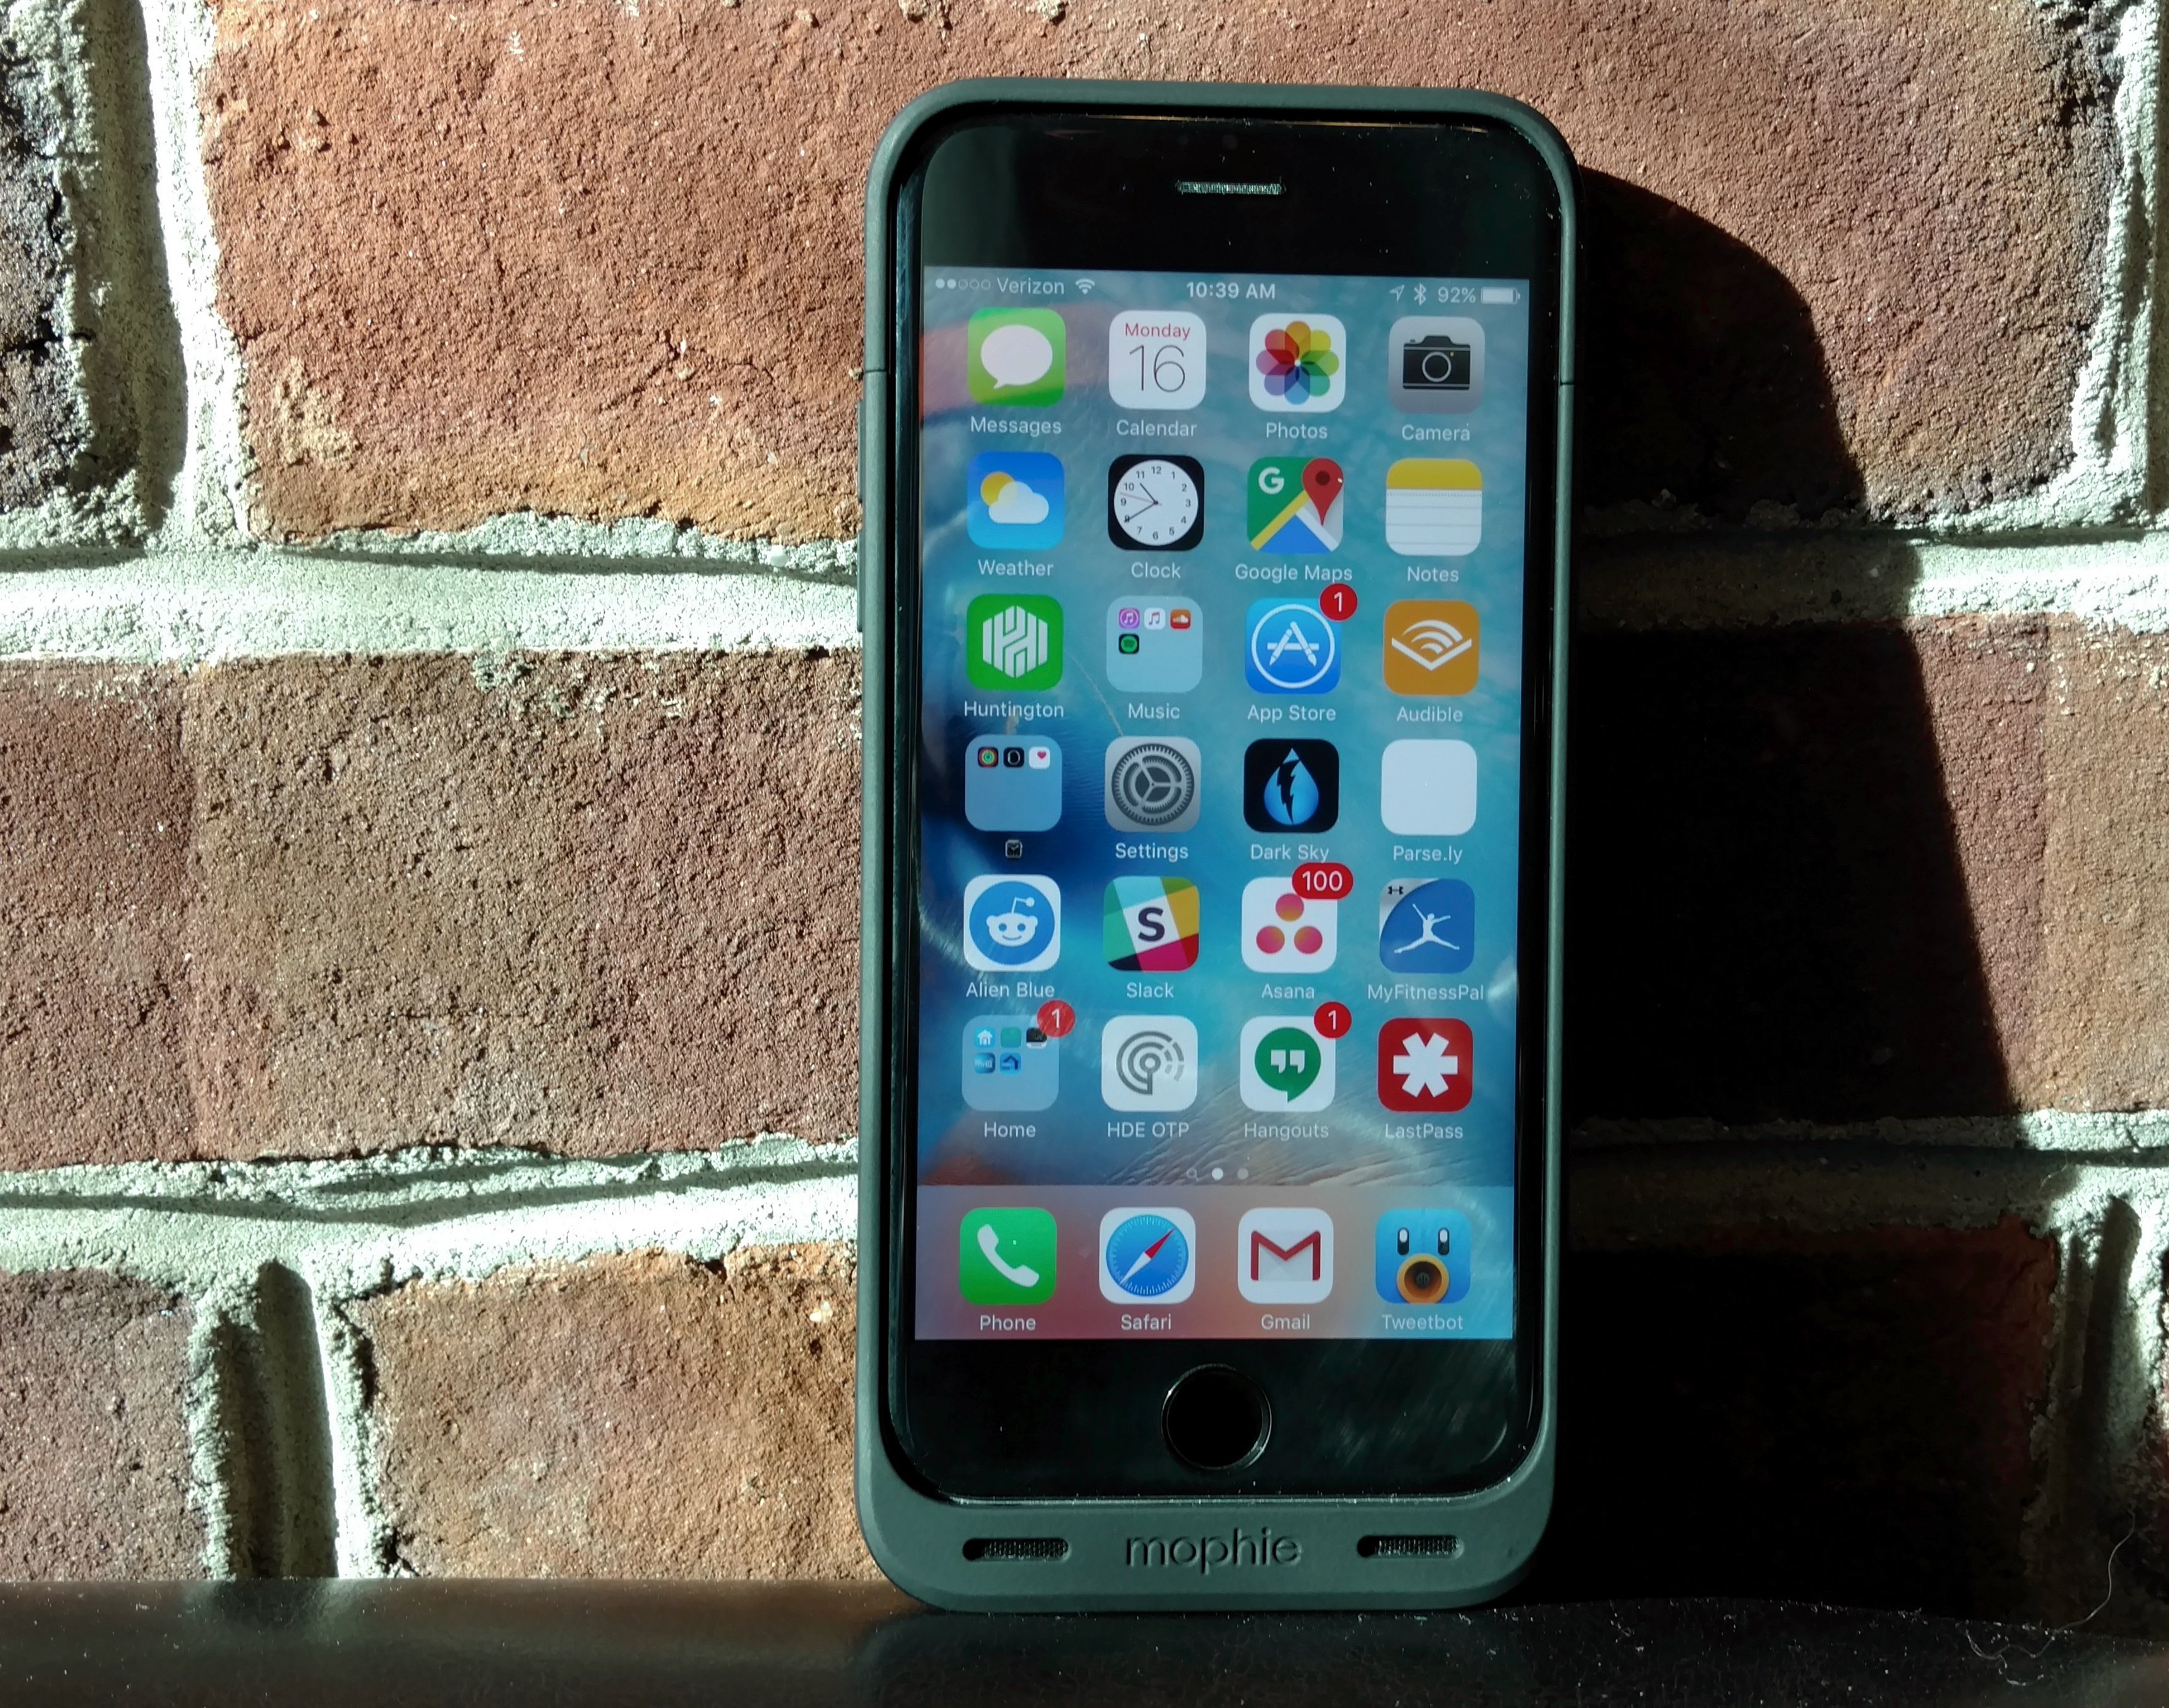 The Mophie Juice Pack Reserve iPhone 6s battery case is the perfect iPhone 6s accessory for power users.